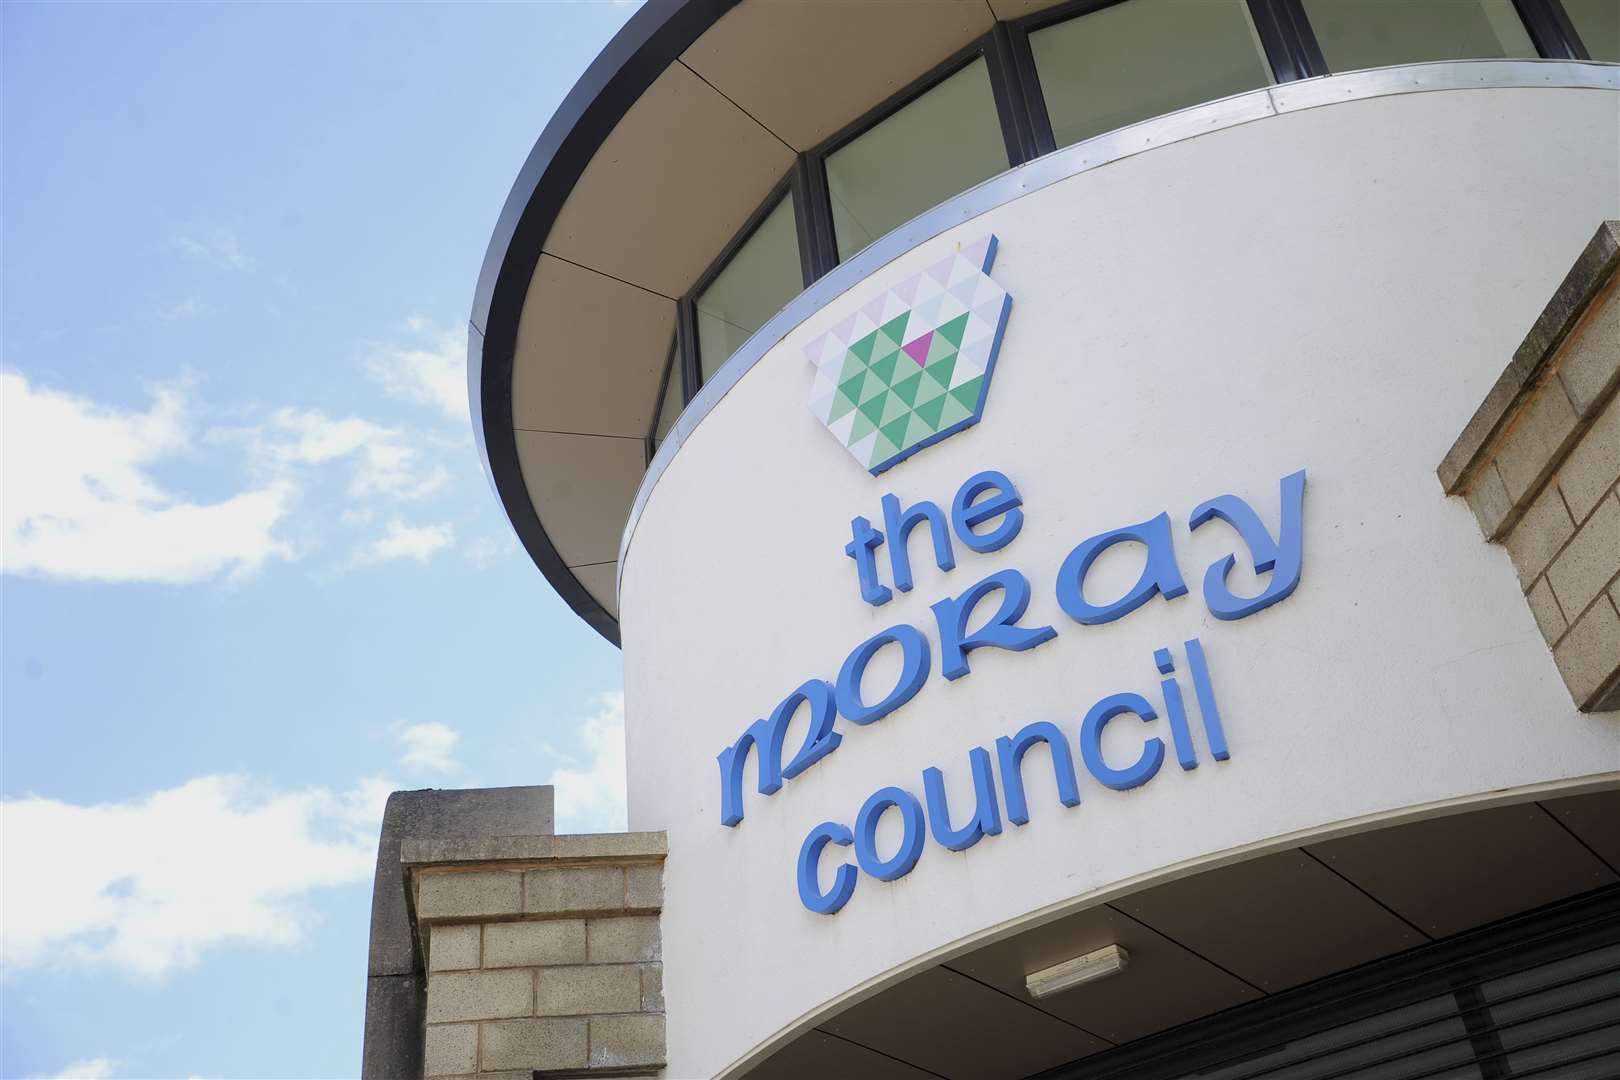 NASUWT has raised concerns with Moray Council over the return of schools in the region – but a second union, the EIS, has had its grievance on the issue resolved after meeting council representatives.